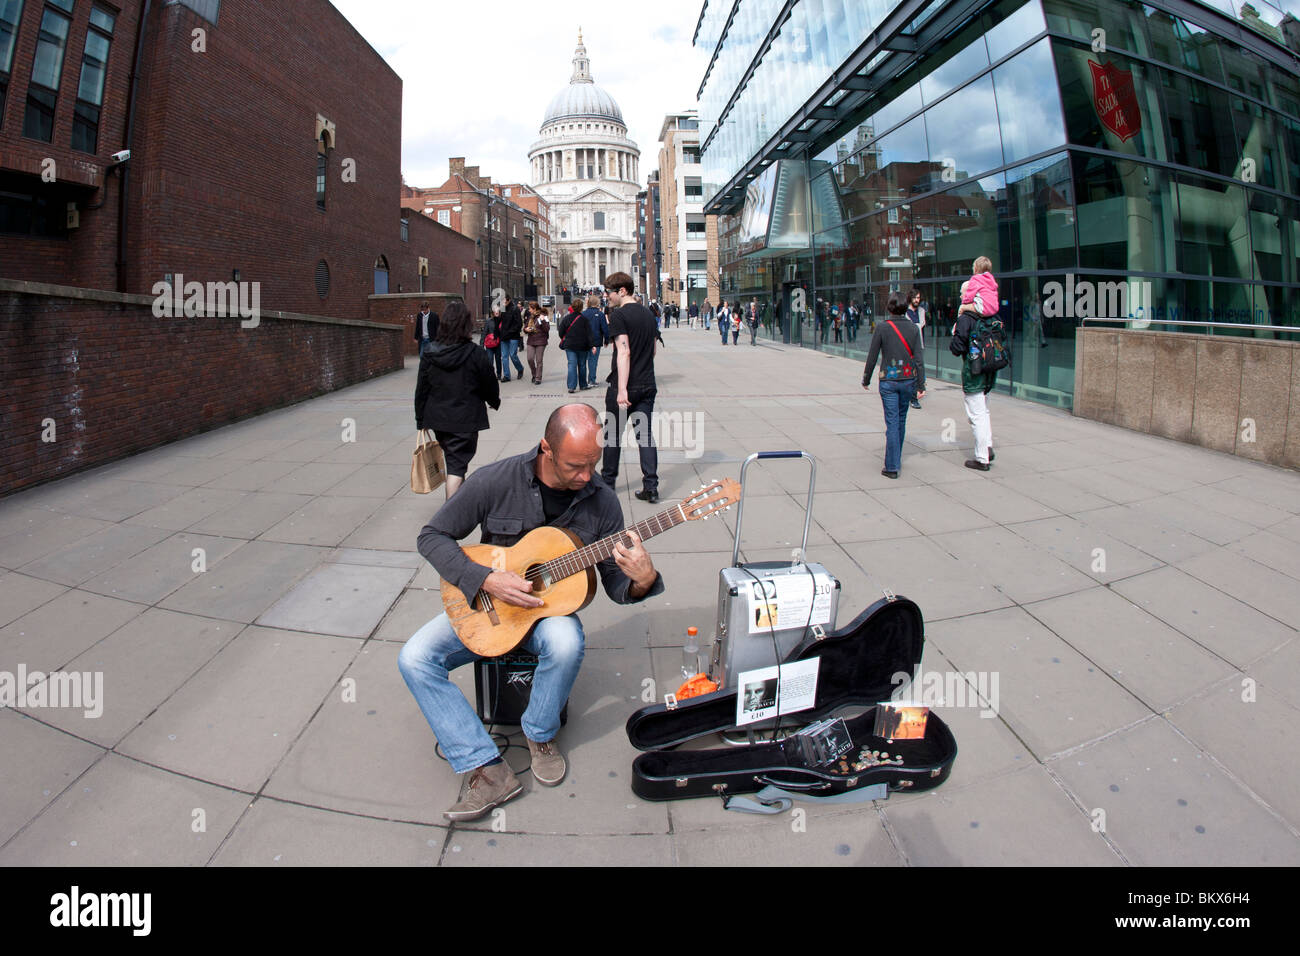 Street Busker near St. Paul's Cathedral London Stock Photo